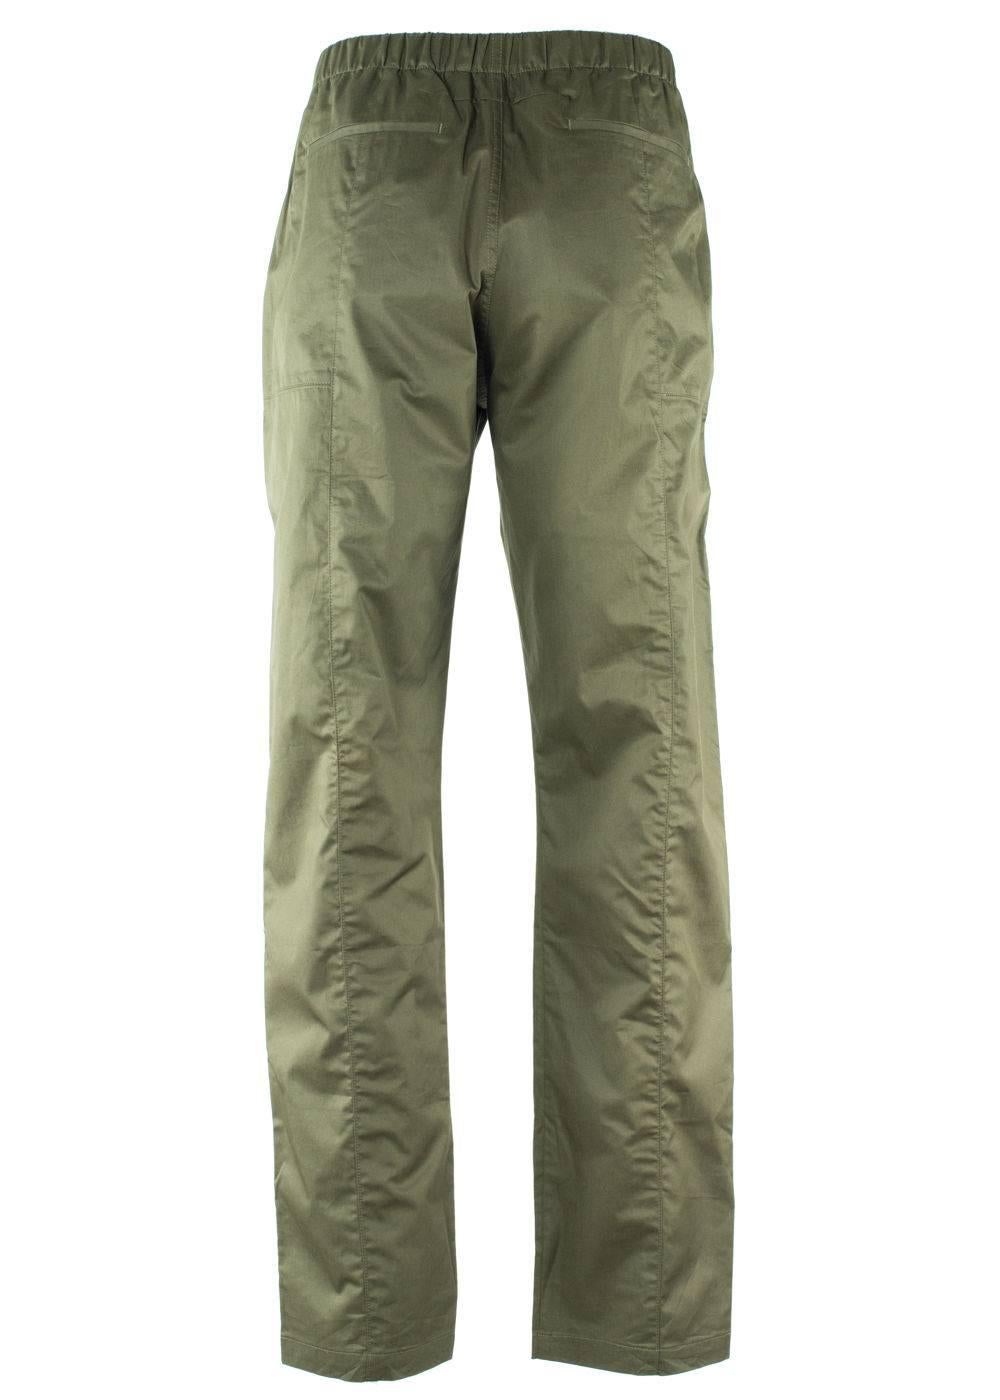 Brand New Givenchy Men's Pants
Original Tag
Retails in Stores & Online for $565
Men's Size EUR54 / US38 Fits True to Size

Casual green olive pants made with 100% cotton from fashion house Givenchy. Super breezy and comfy for the summer season with